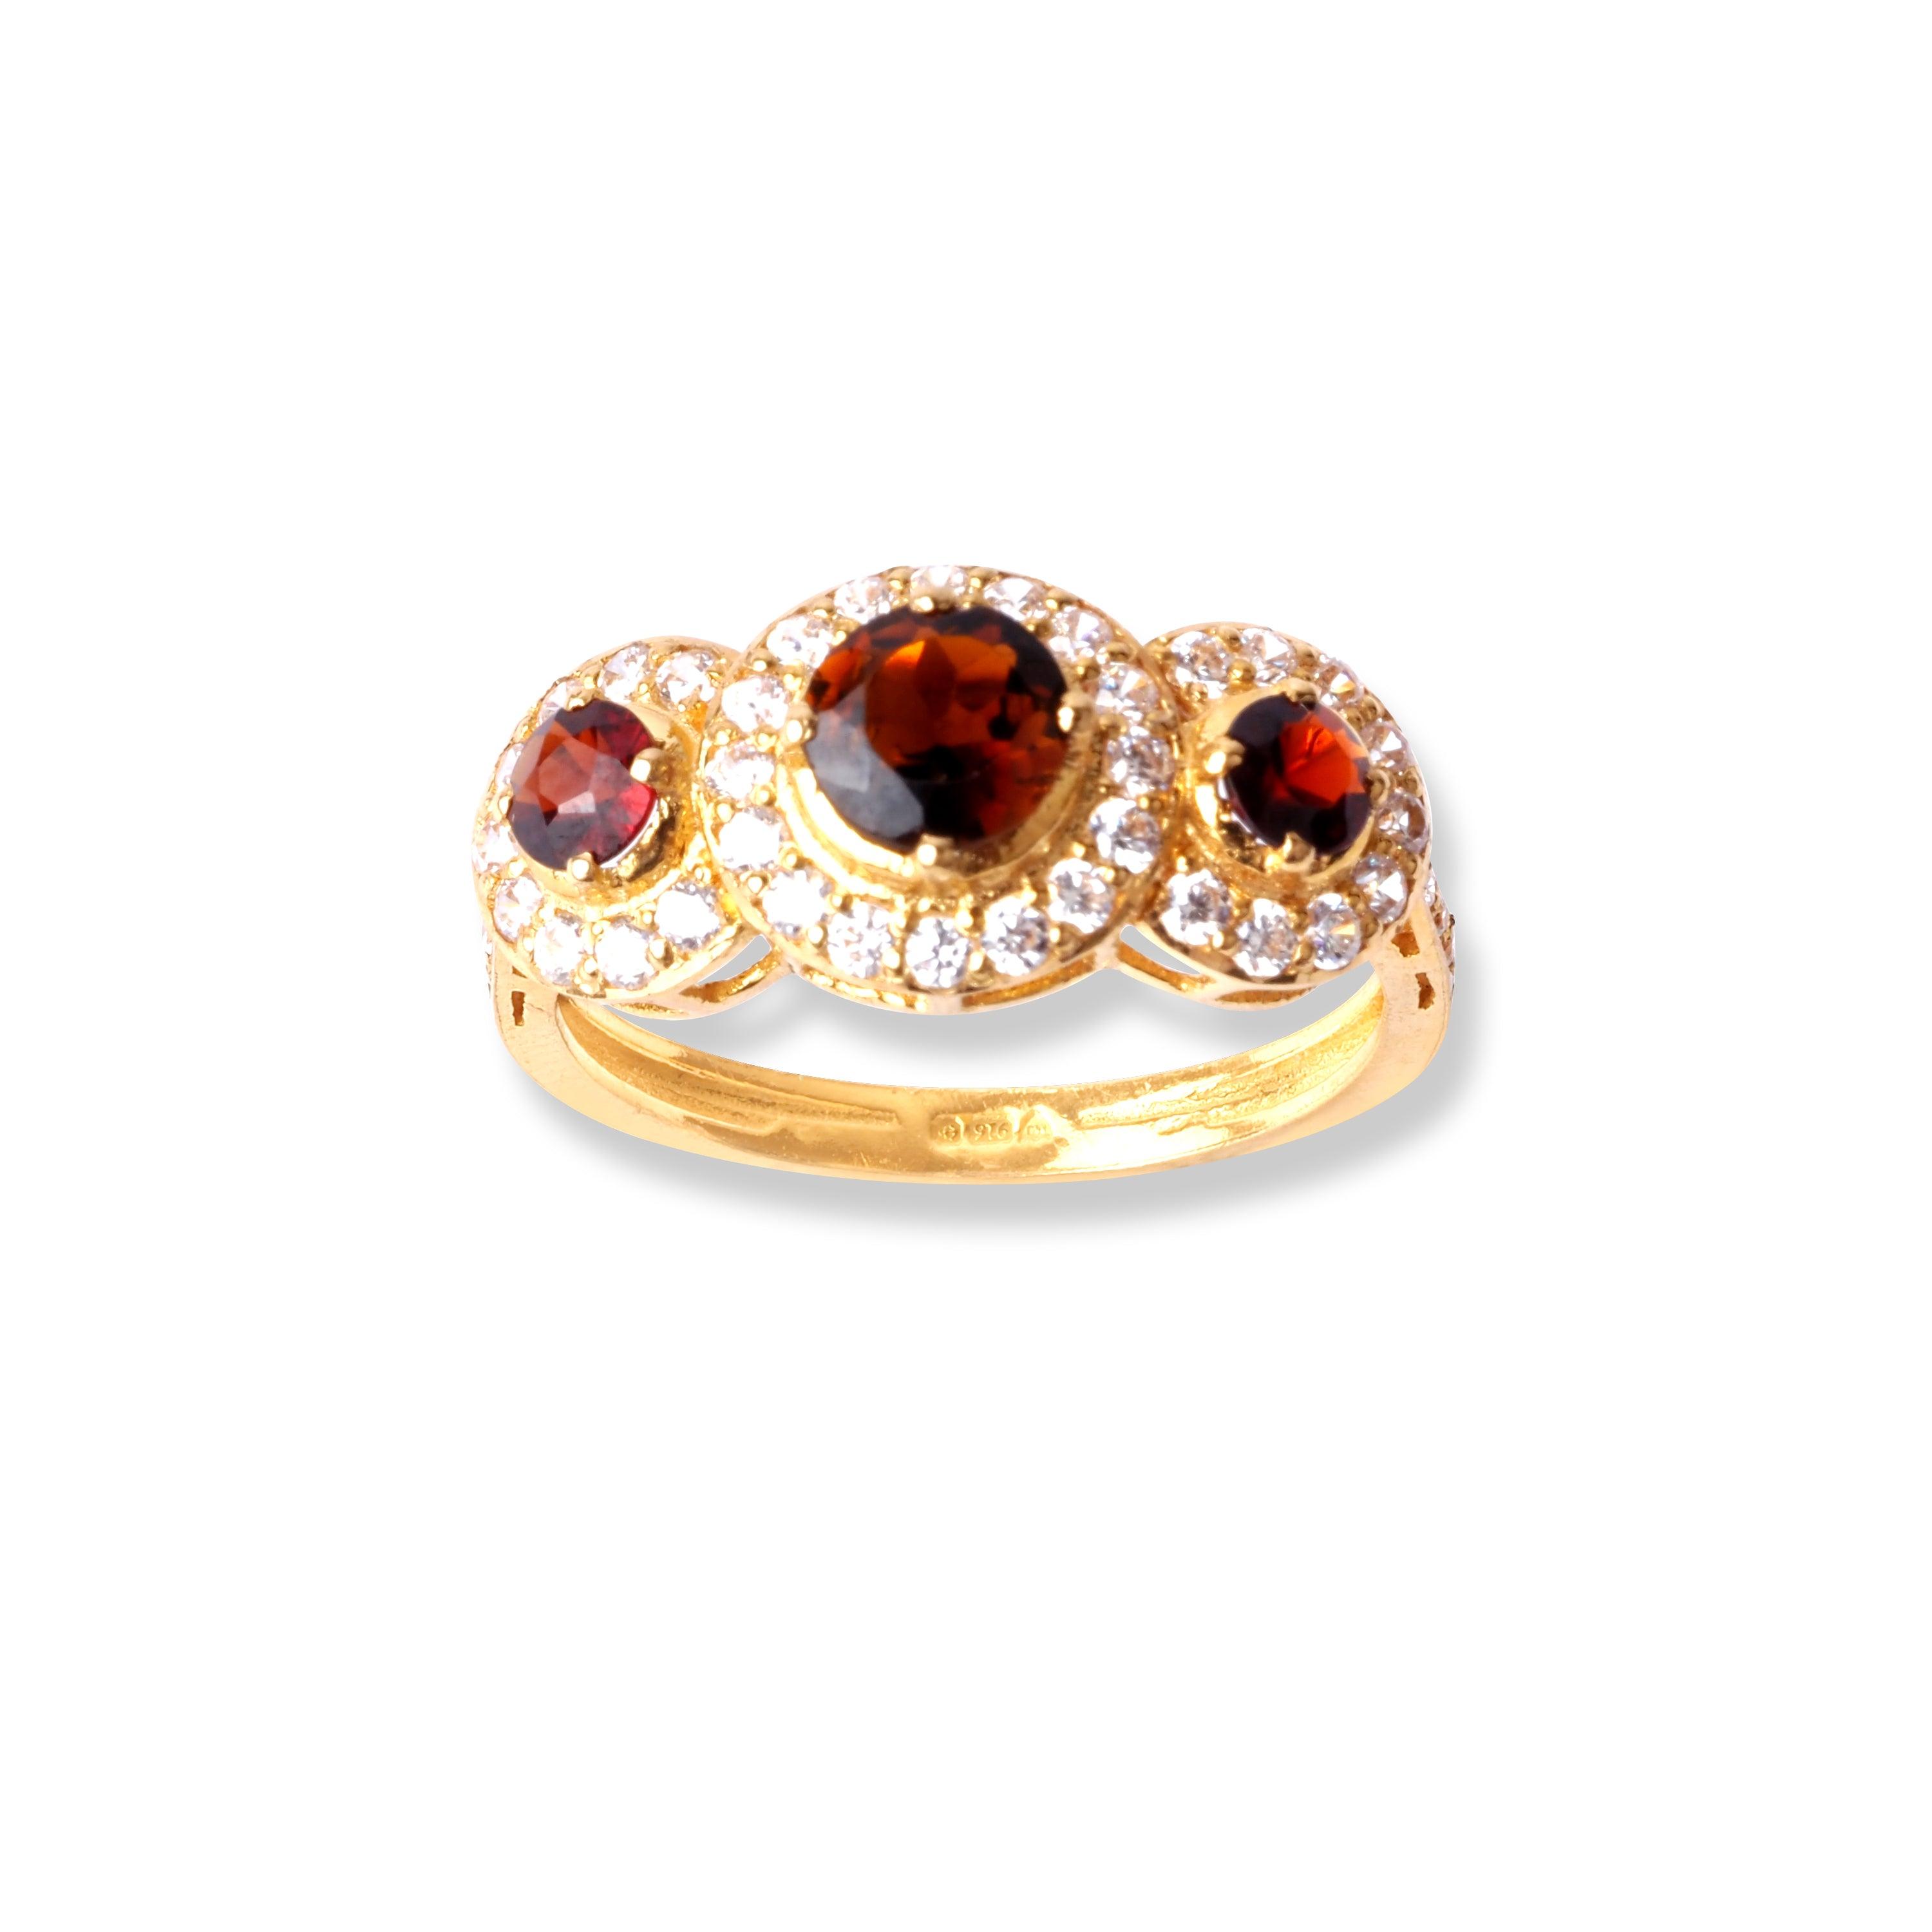 22ct Gold Ring With Amber Coloured Stones & Cubic Zirconia Stones (3.5g) LR-6596 - Minar Jewellers